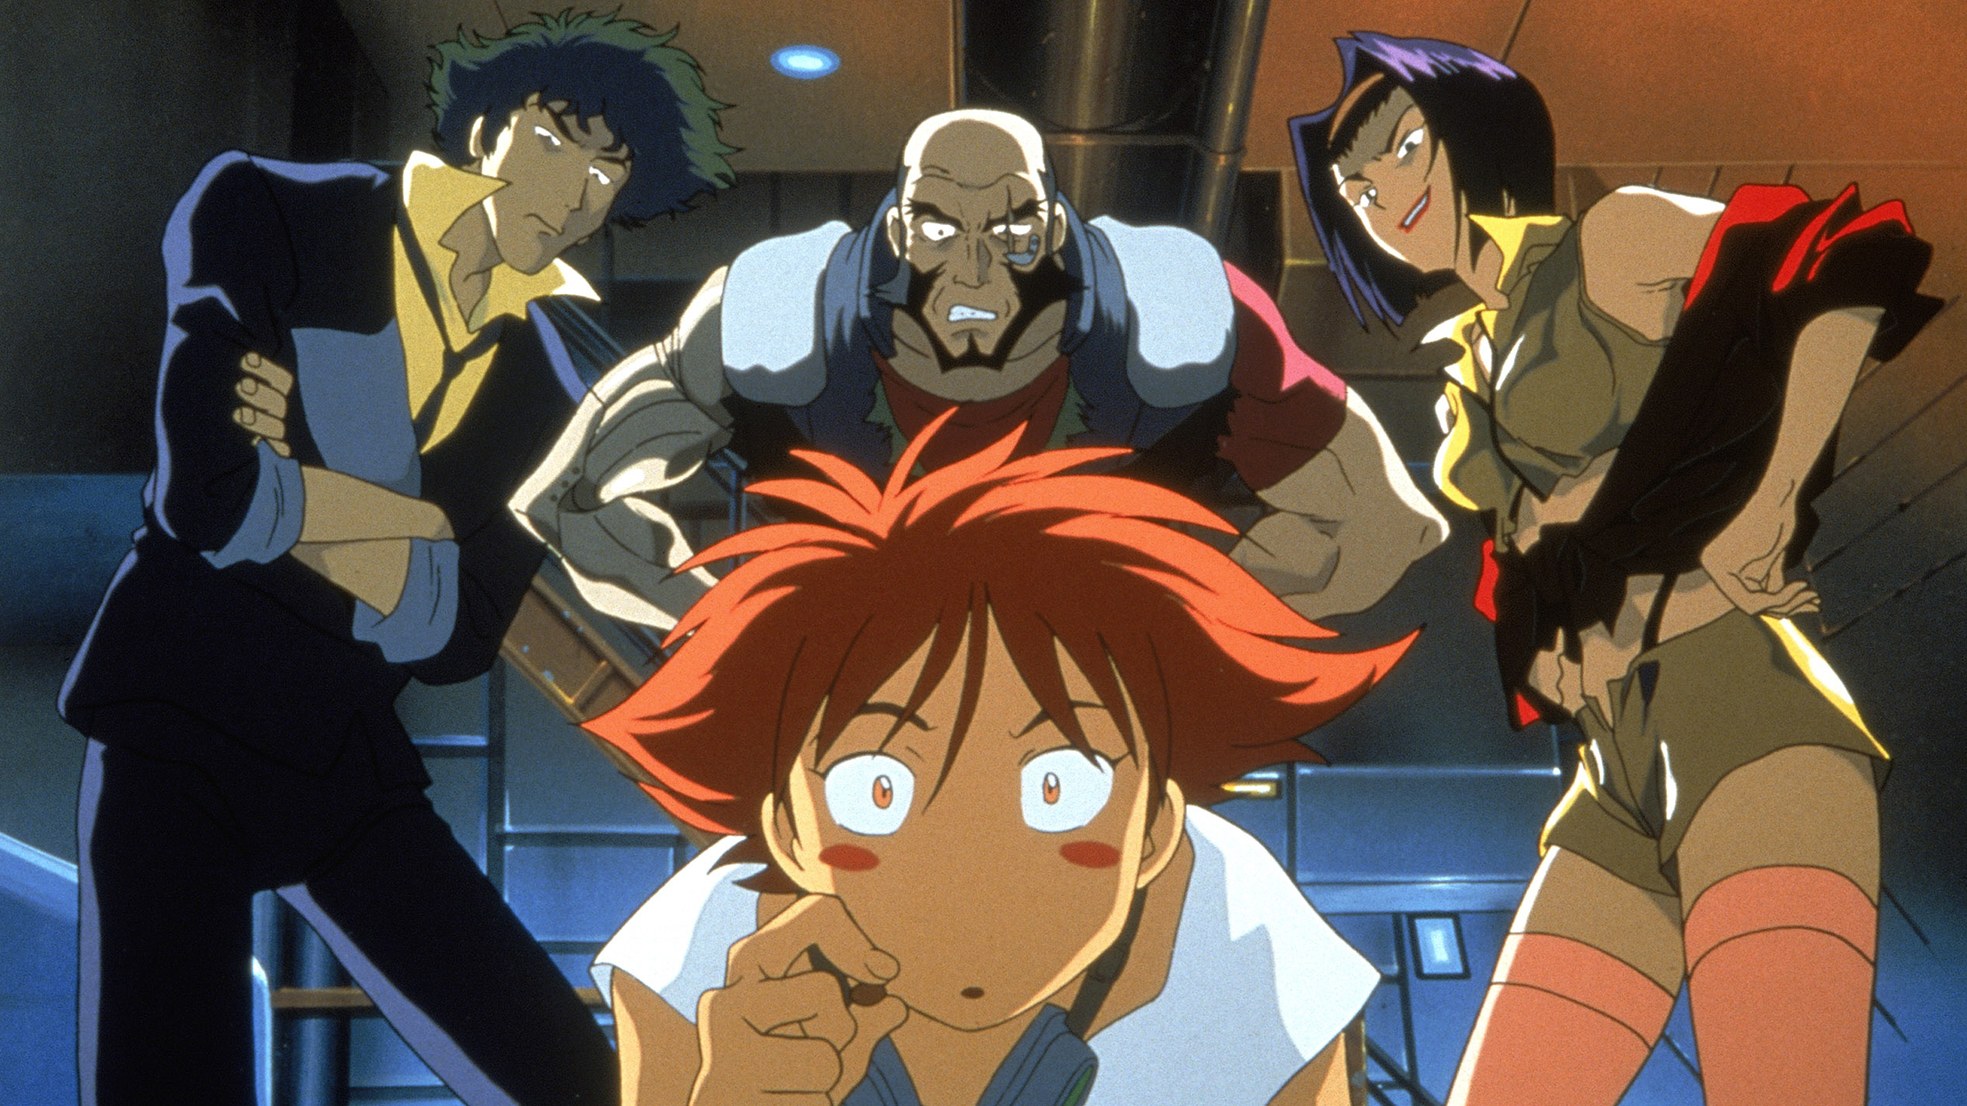 The 10 Best Anime On Hulu  The Mary Sue